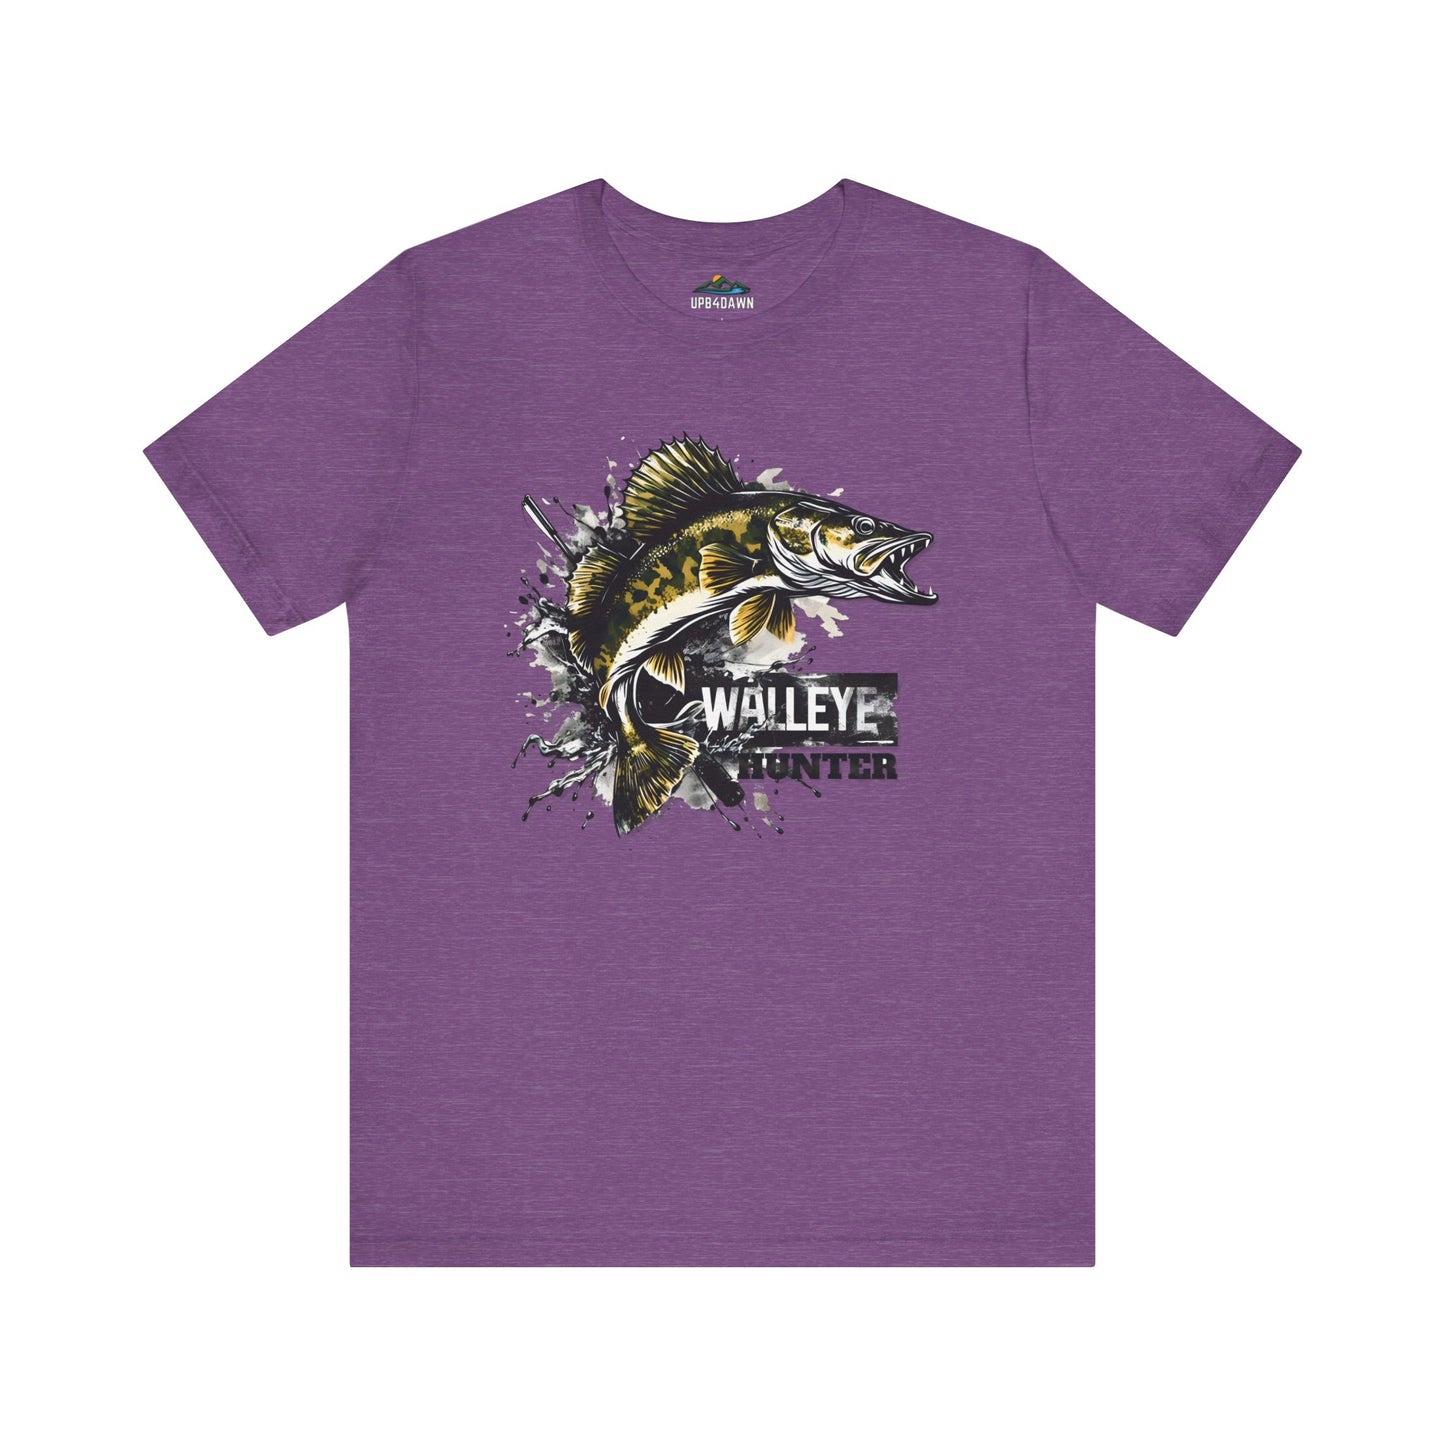 A Walleye Hunter - T-Shirt featuring a graphic design of a walleye fish with the text "walleye hunter" below it. The t-shirt has a crew neckline and short sleeves.